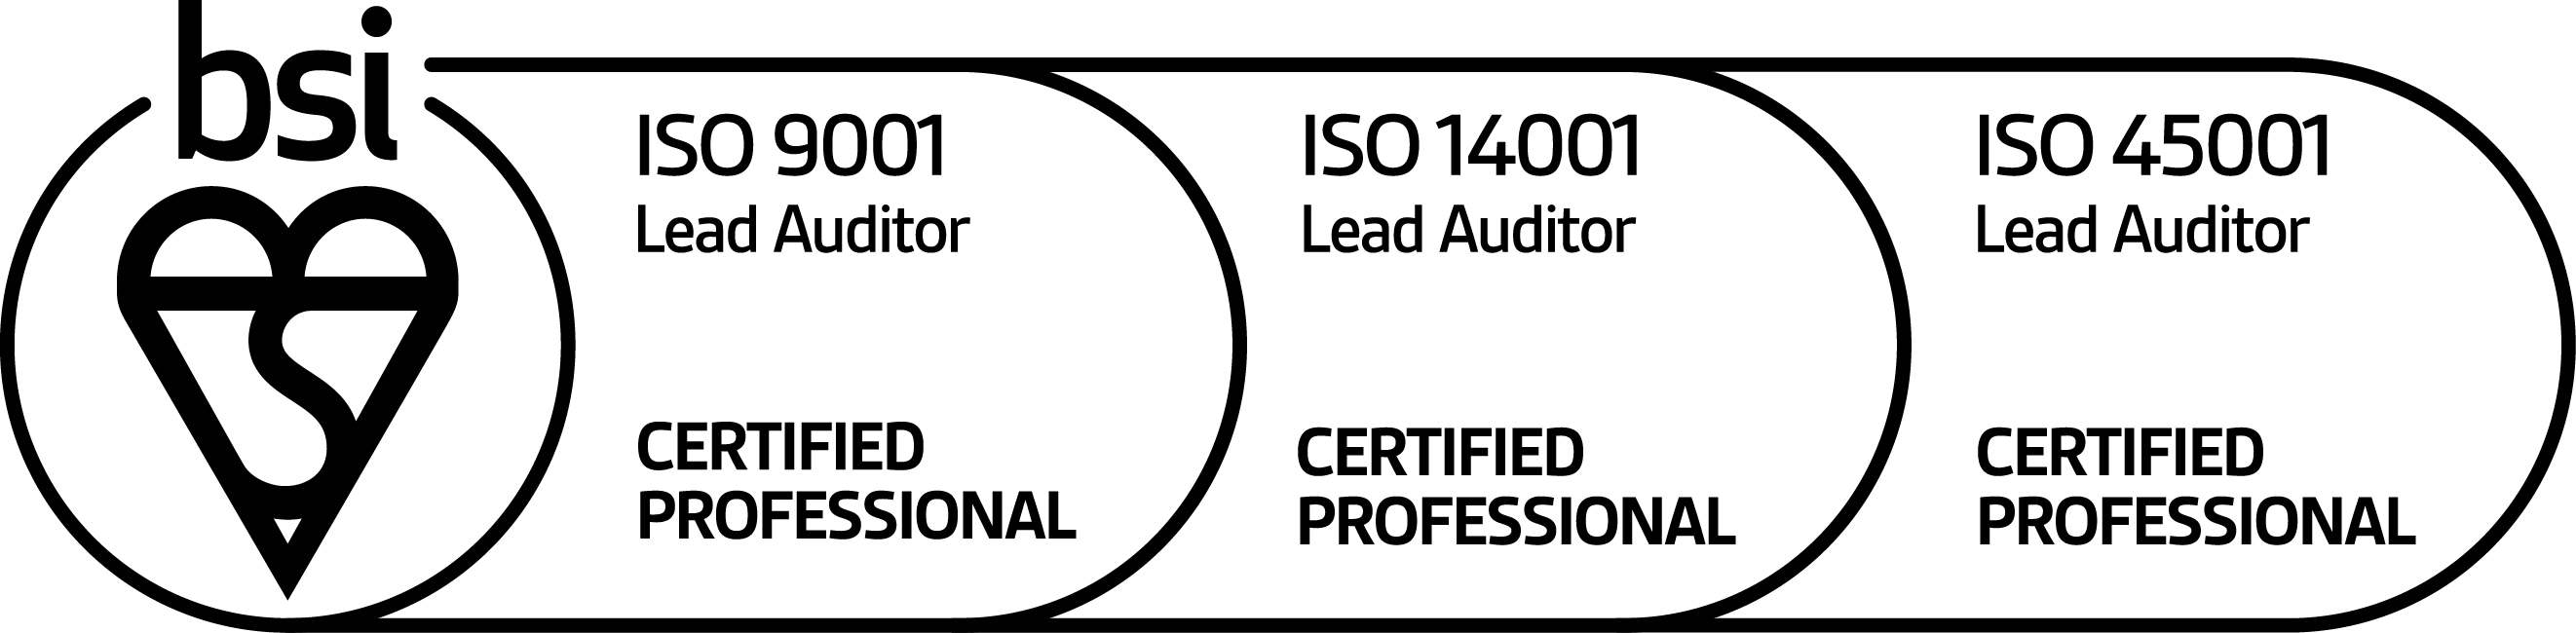 ISO-9001-Internal-Auditor-Certified-Professional-certified-professional-mark-of-trust-logo-En-GB-0820.jpg